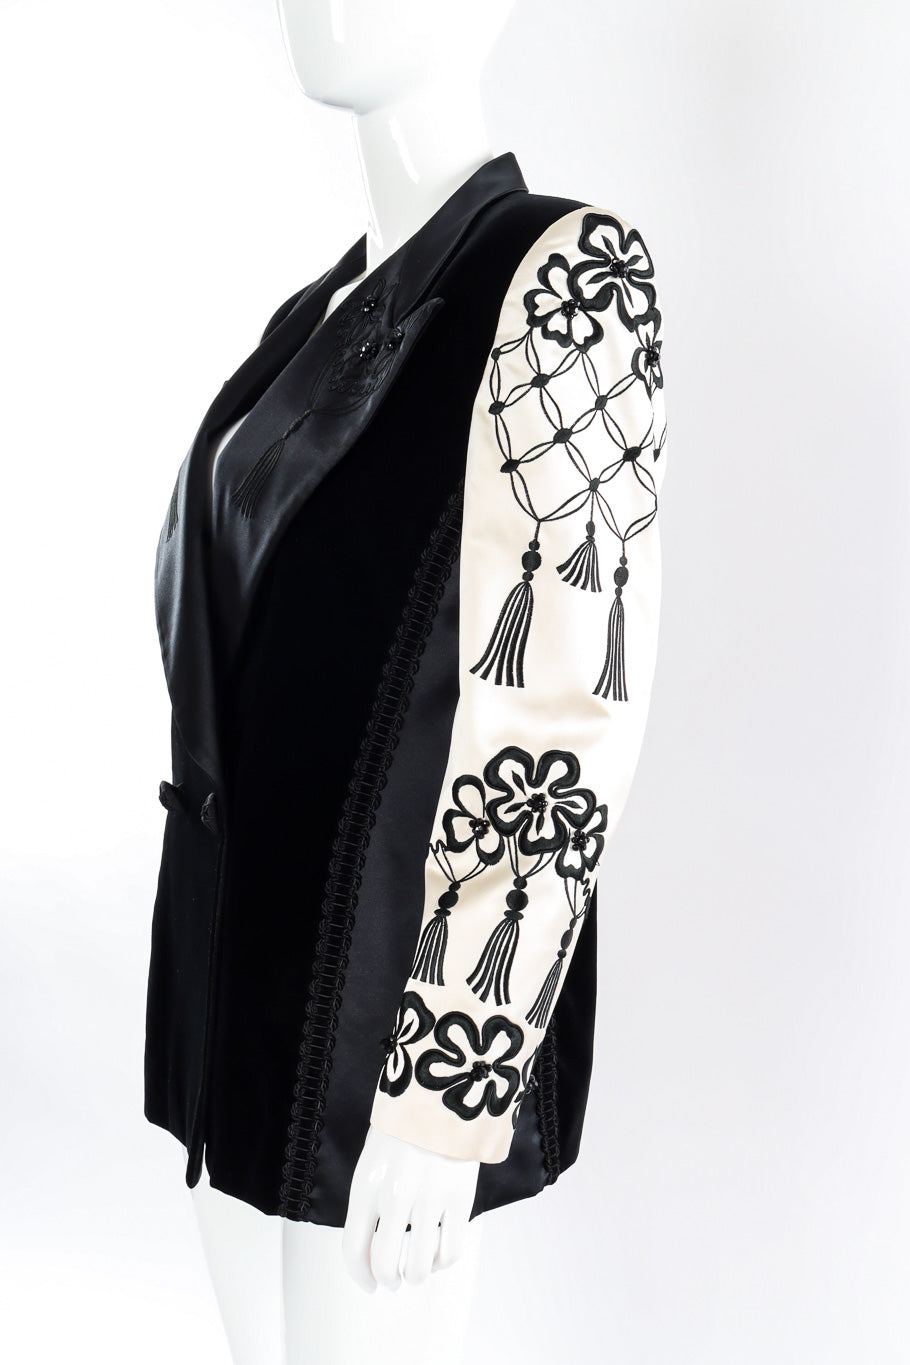 Embroidered longline blazer with contrast sleeves and wide silk lapel by Escada mannequin sleeve @recessla